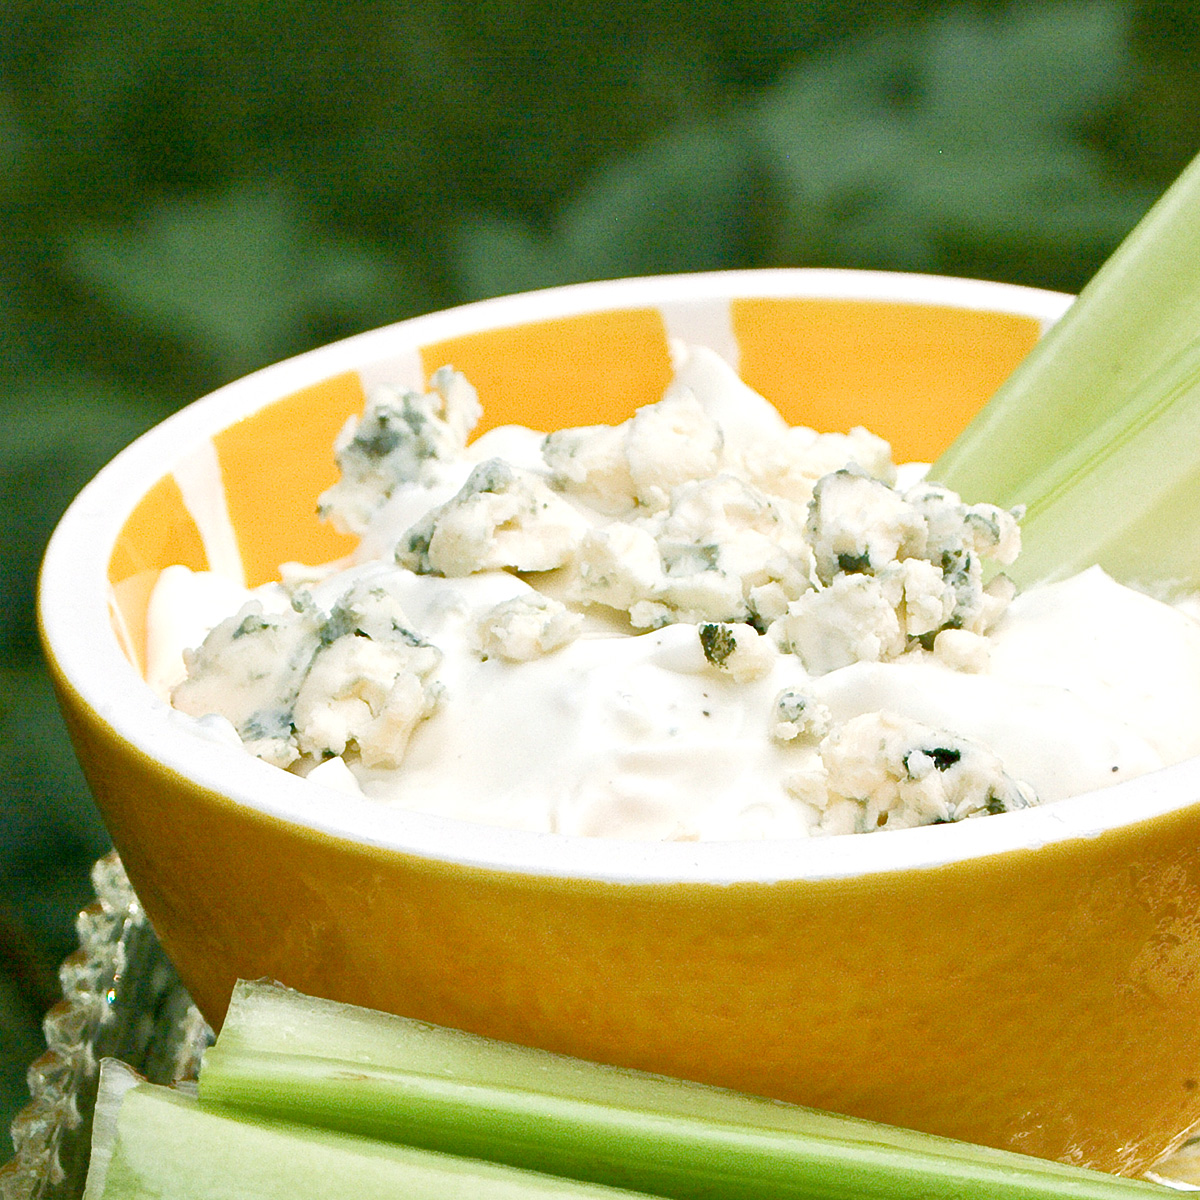 Blue cheese dip in a decorative bowl with celery sticks alongside.